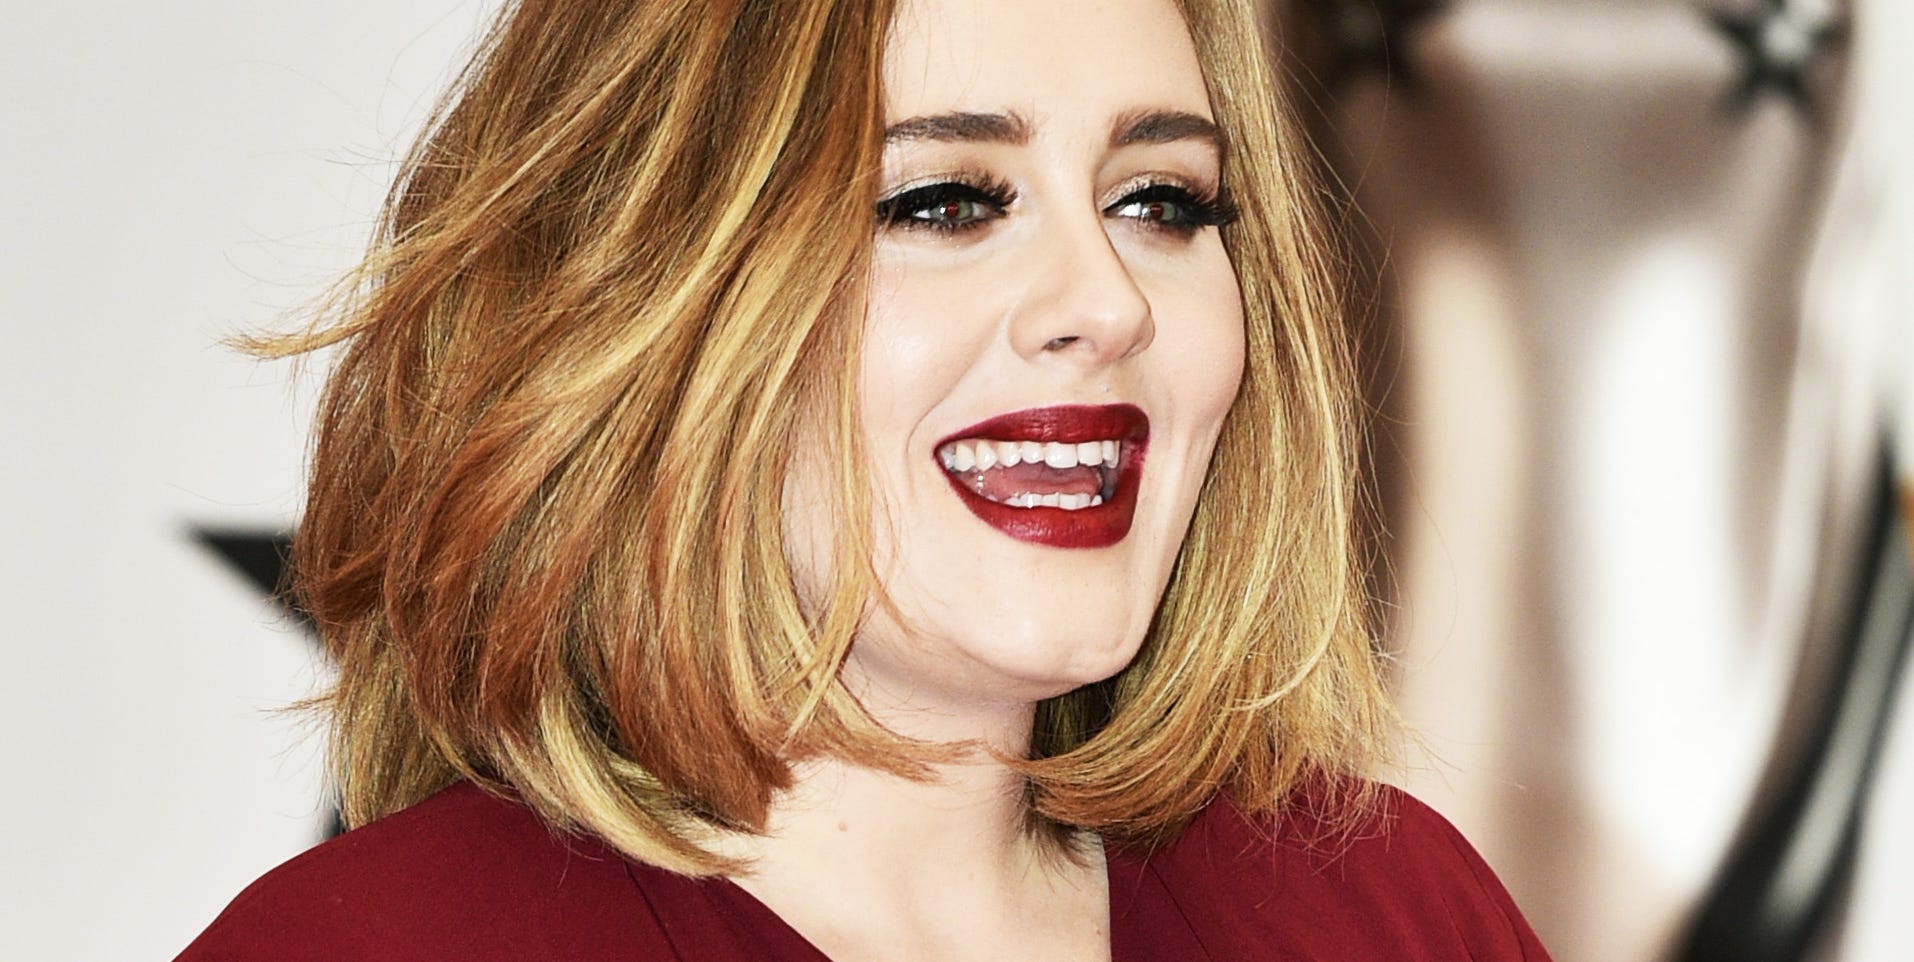 Hair, Face, Red, Blond, Facial expression, Lip, Beauty, Hairstyle, Shoulder, Fashion, 